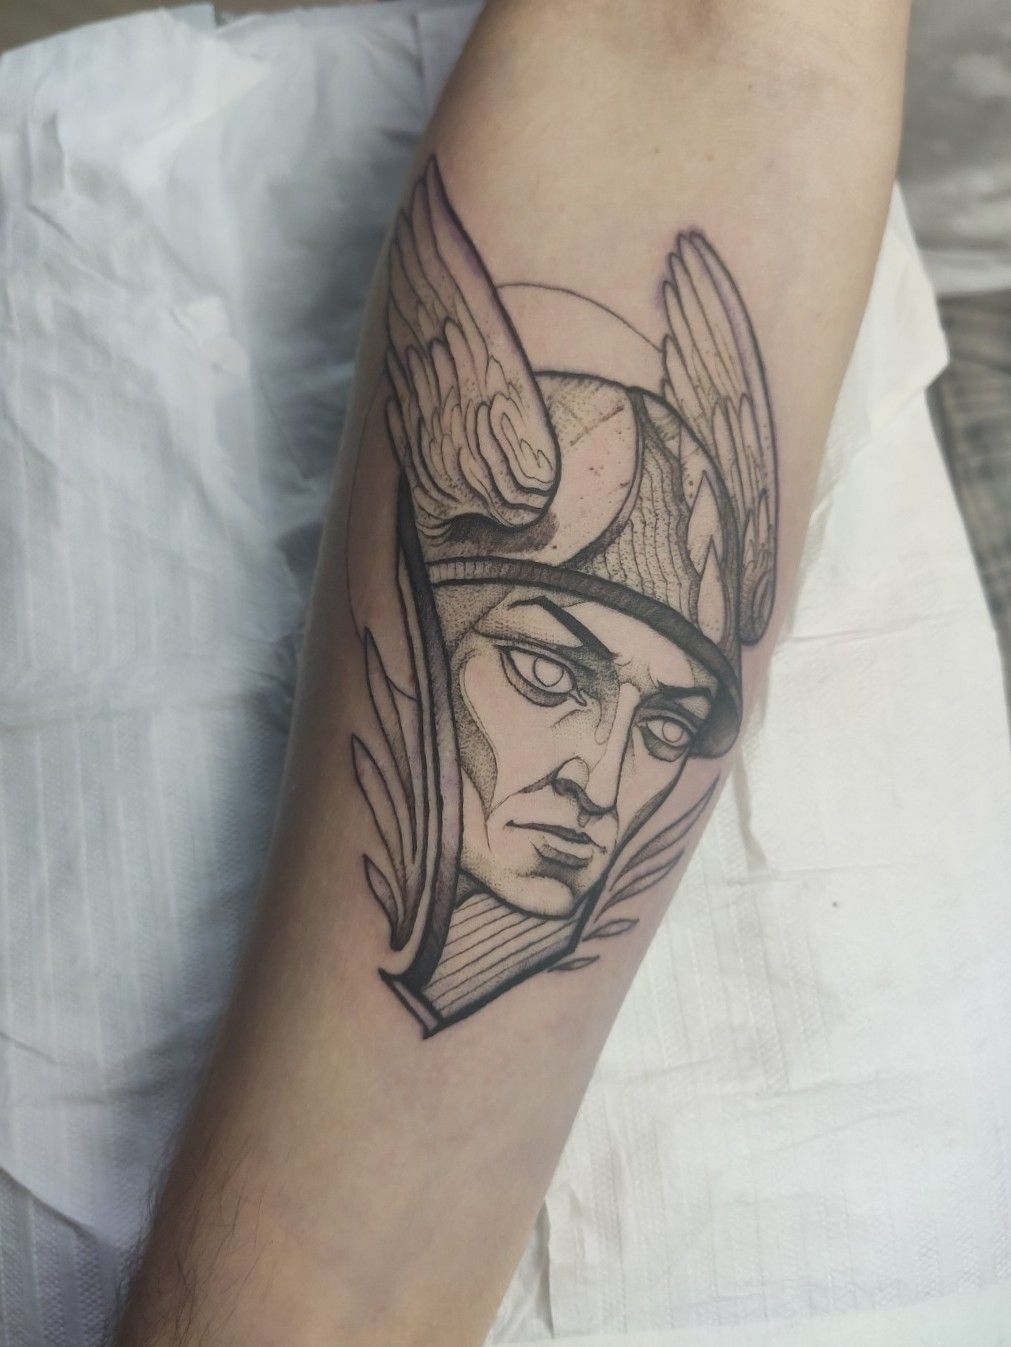  Hermes Έρμῆς  Working on this project based on The Greek god Hermes  Thanks for the artistic freedom and let me create this em 2023  Tatoo  Tatuagens Tatuagem